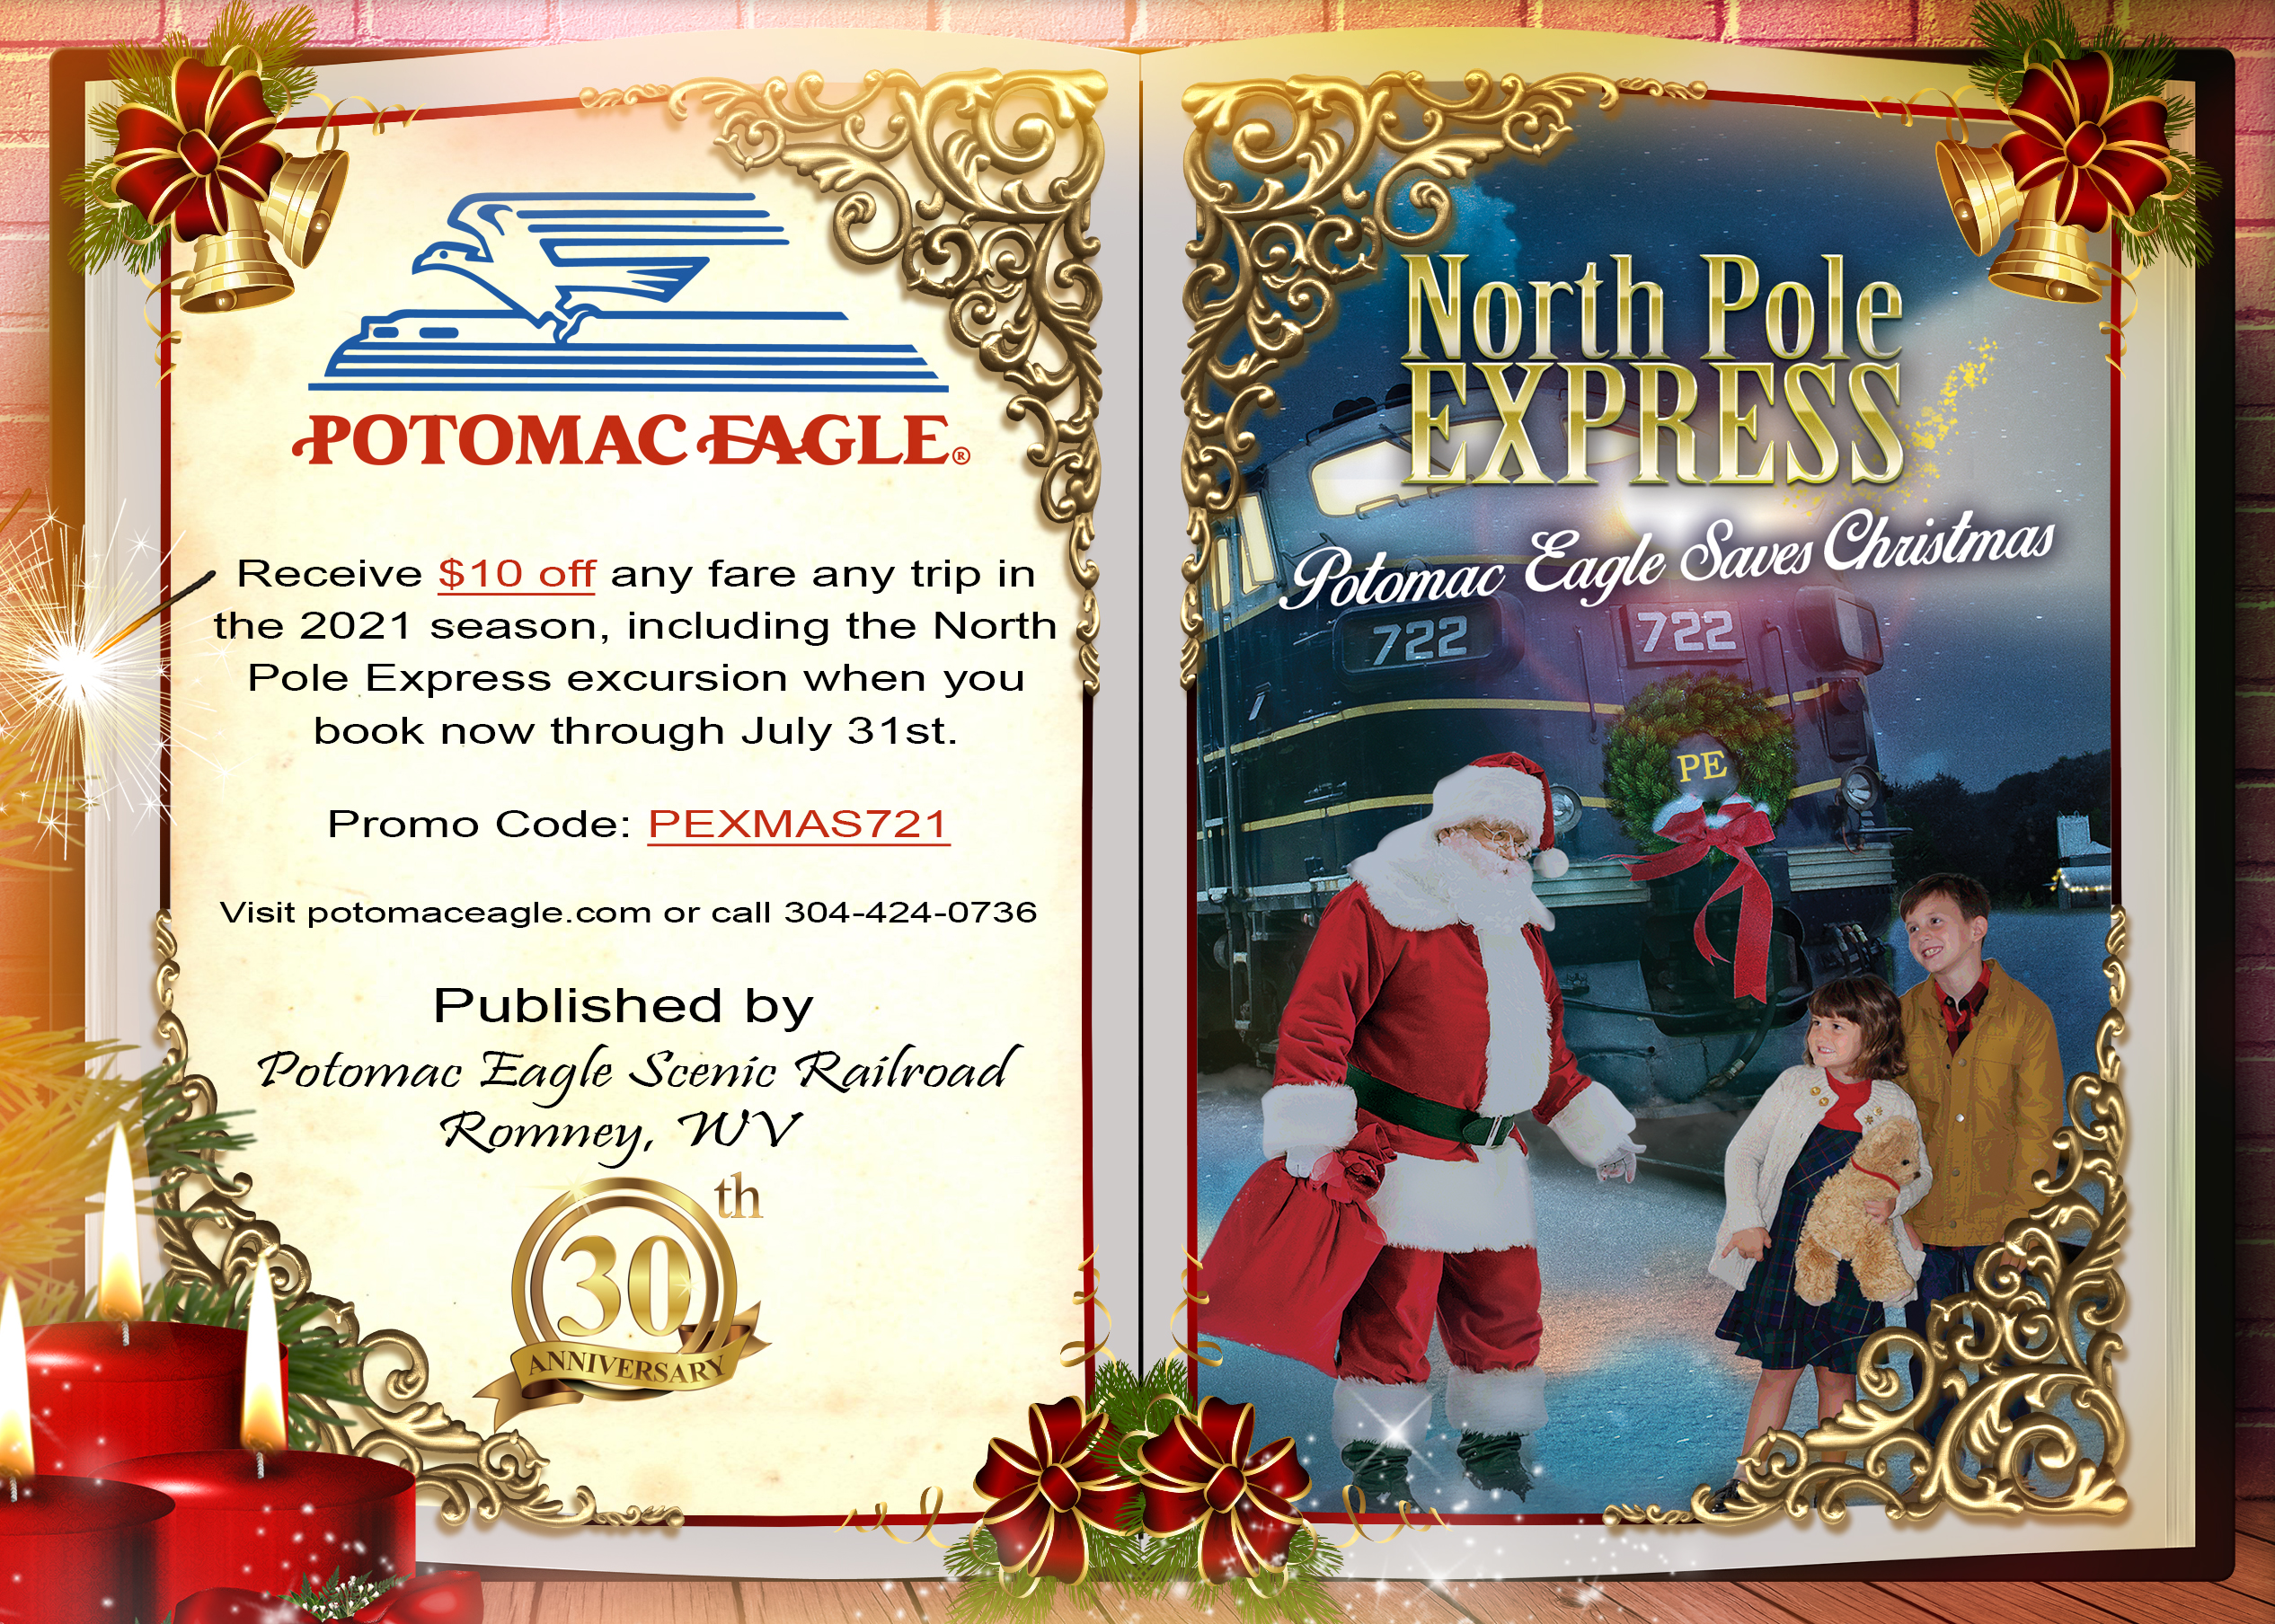 North Pole Express Promotion